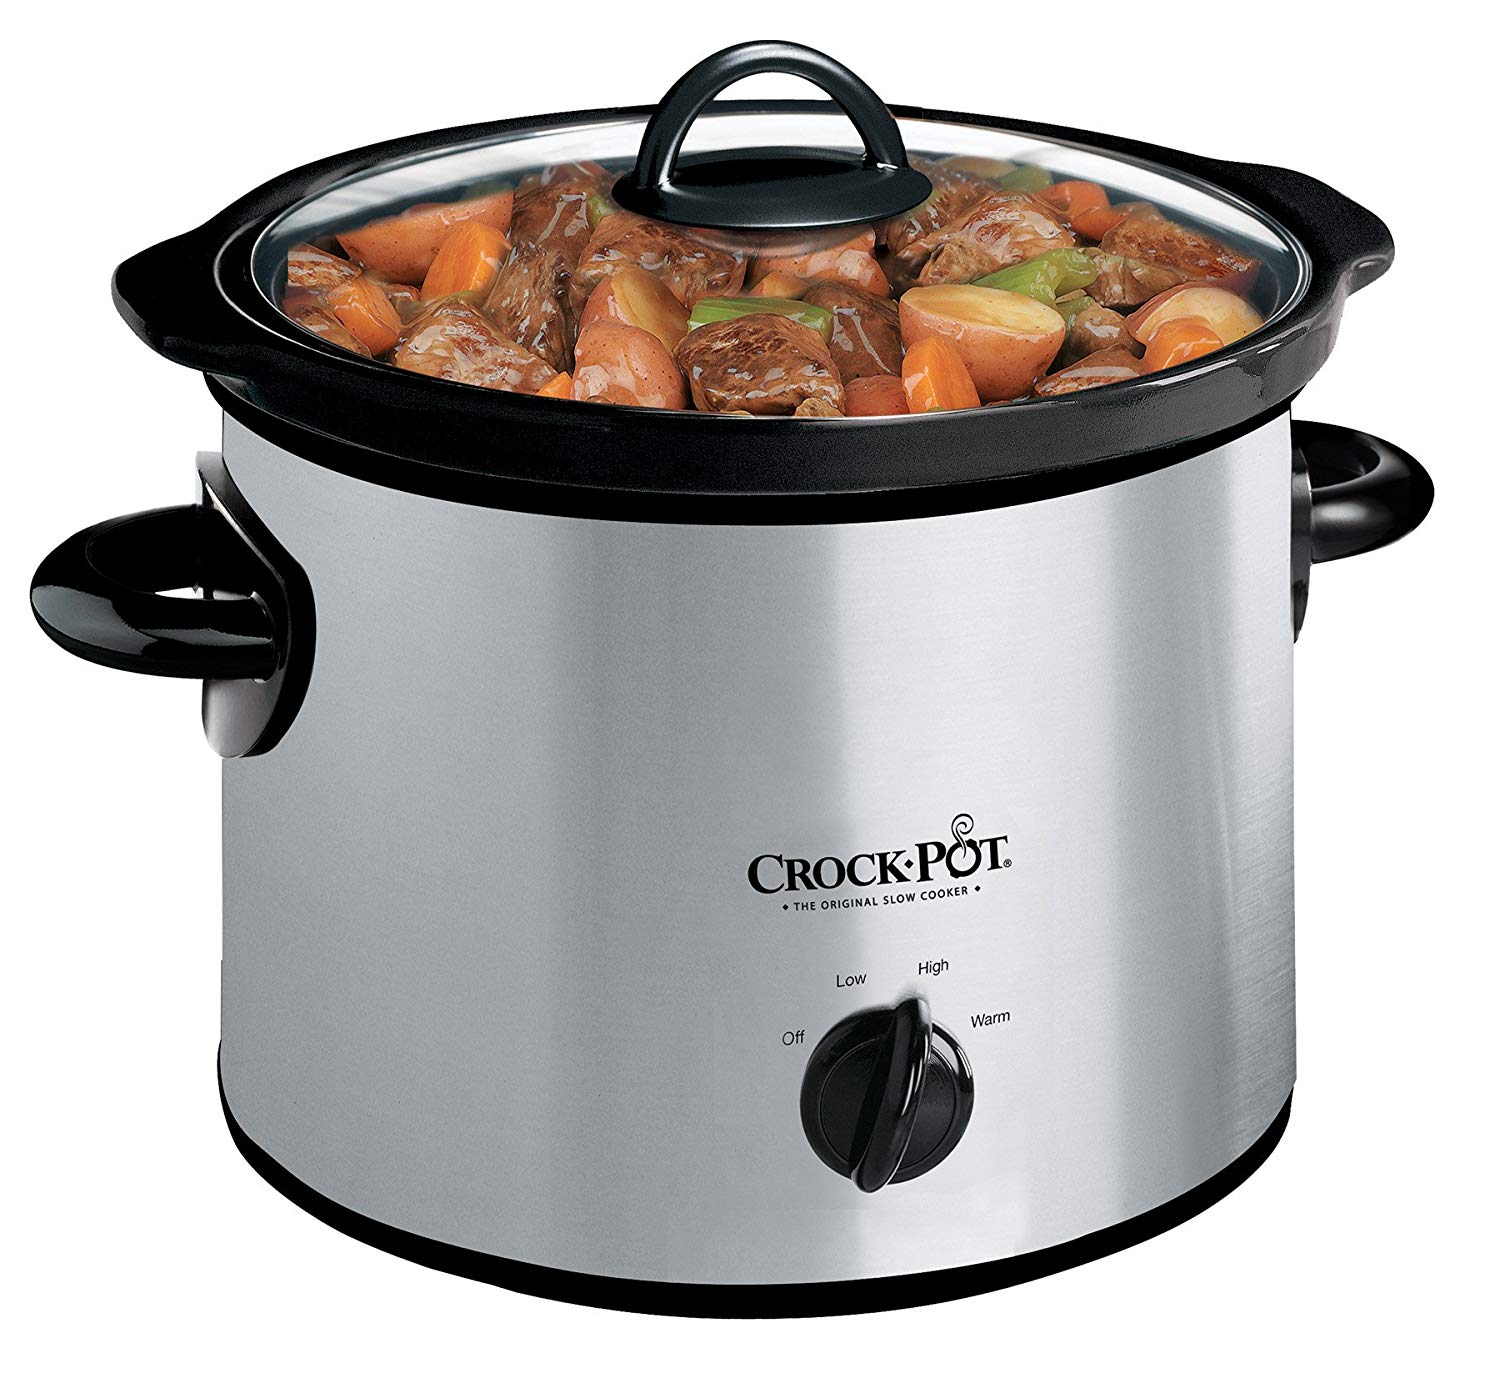 8 Best 3 Quart Slow Cookers You Can Buy in 2019 | Get the Right Model ...